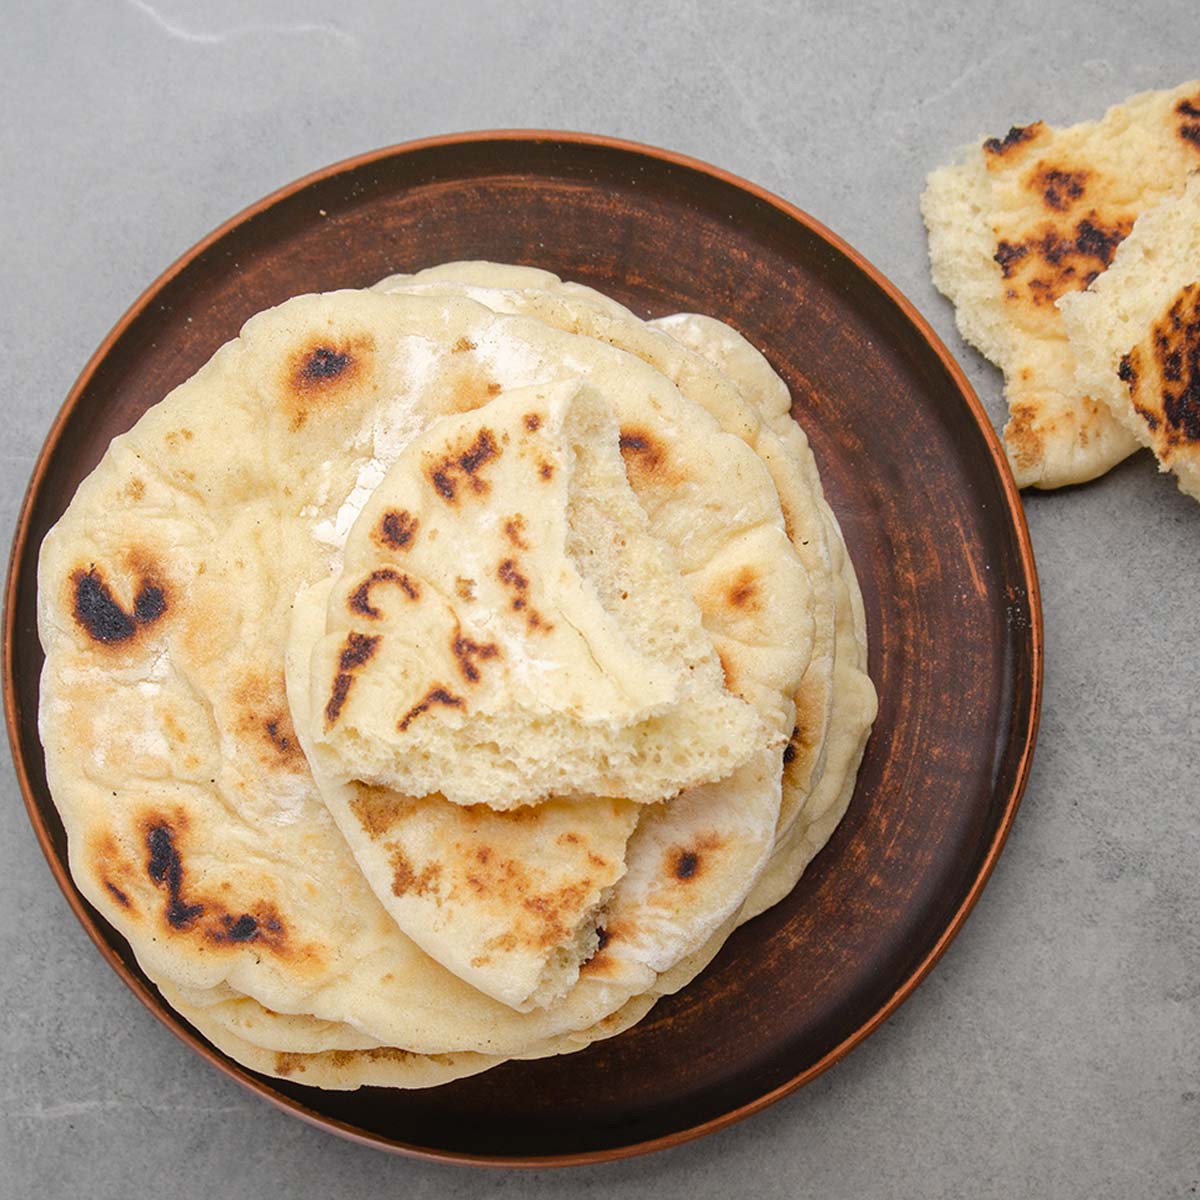 Warming Pita bread in the microwave is so fast and convenient. To microwave pita successfully, you need to do a few seconds of prep.